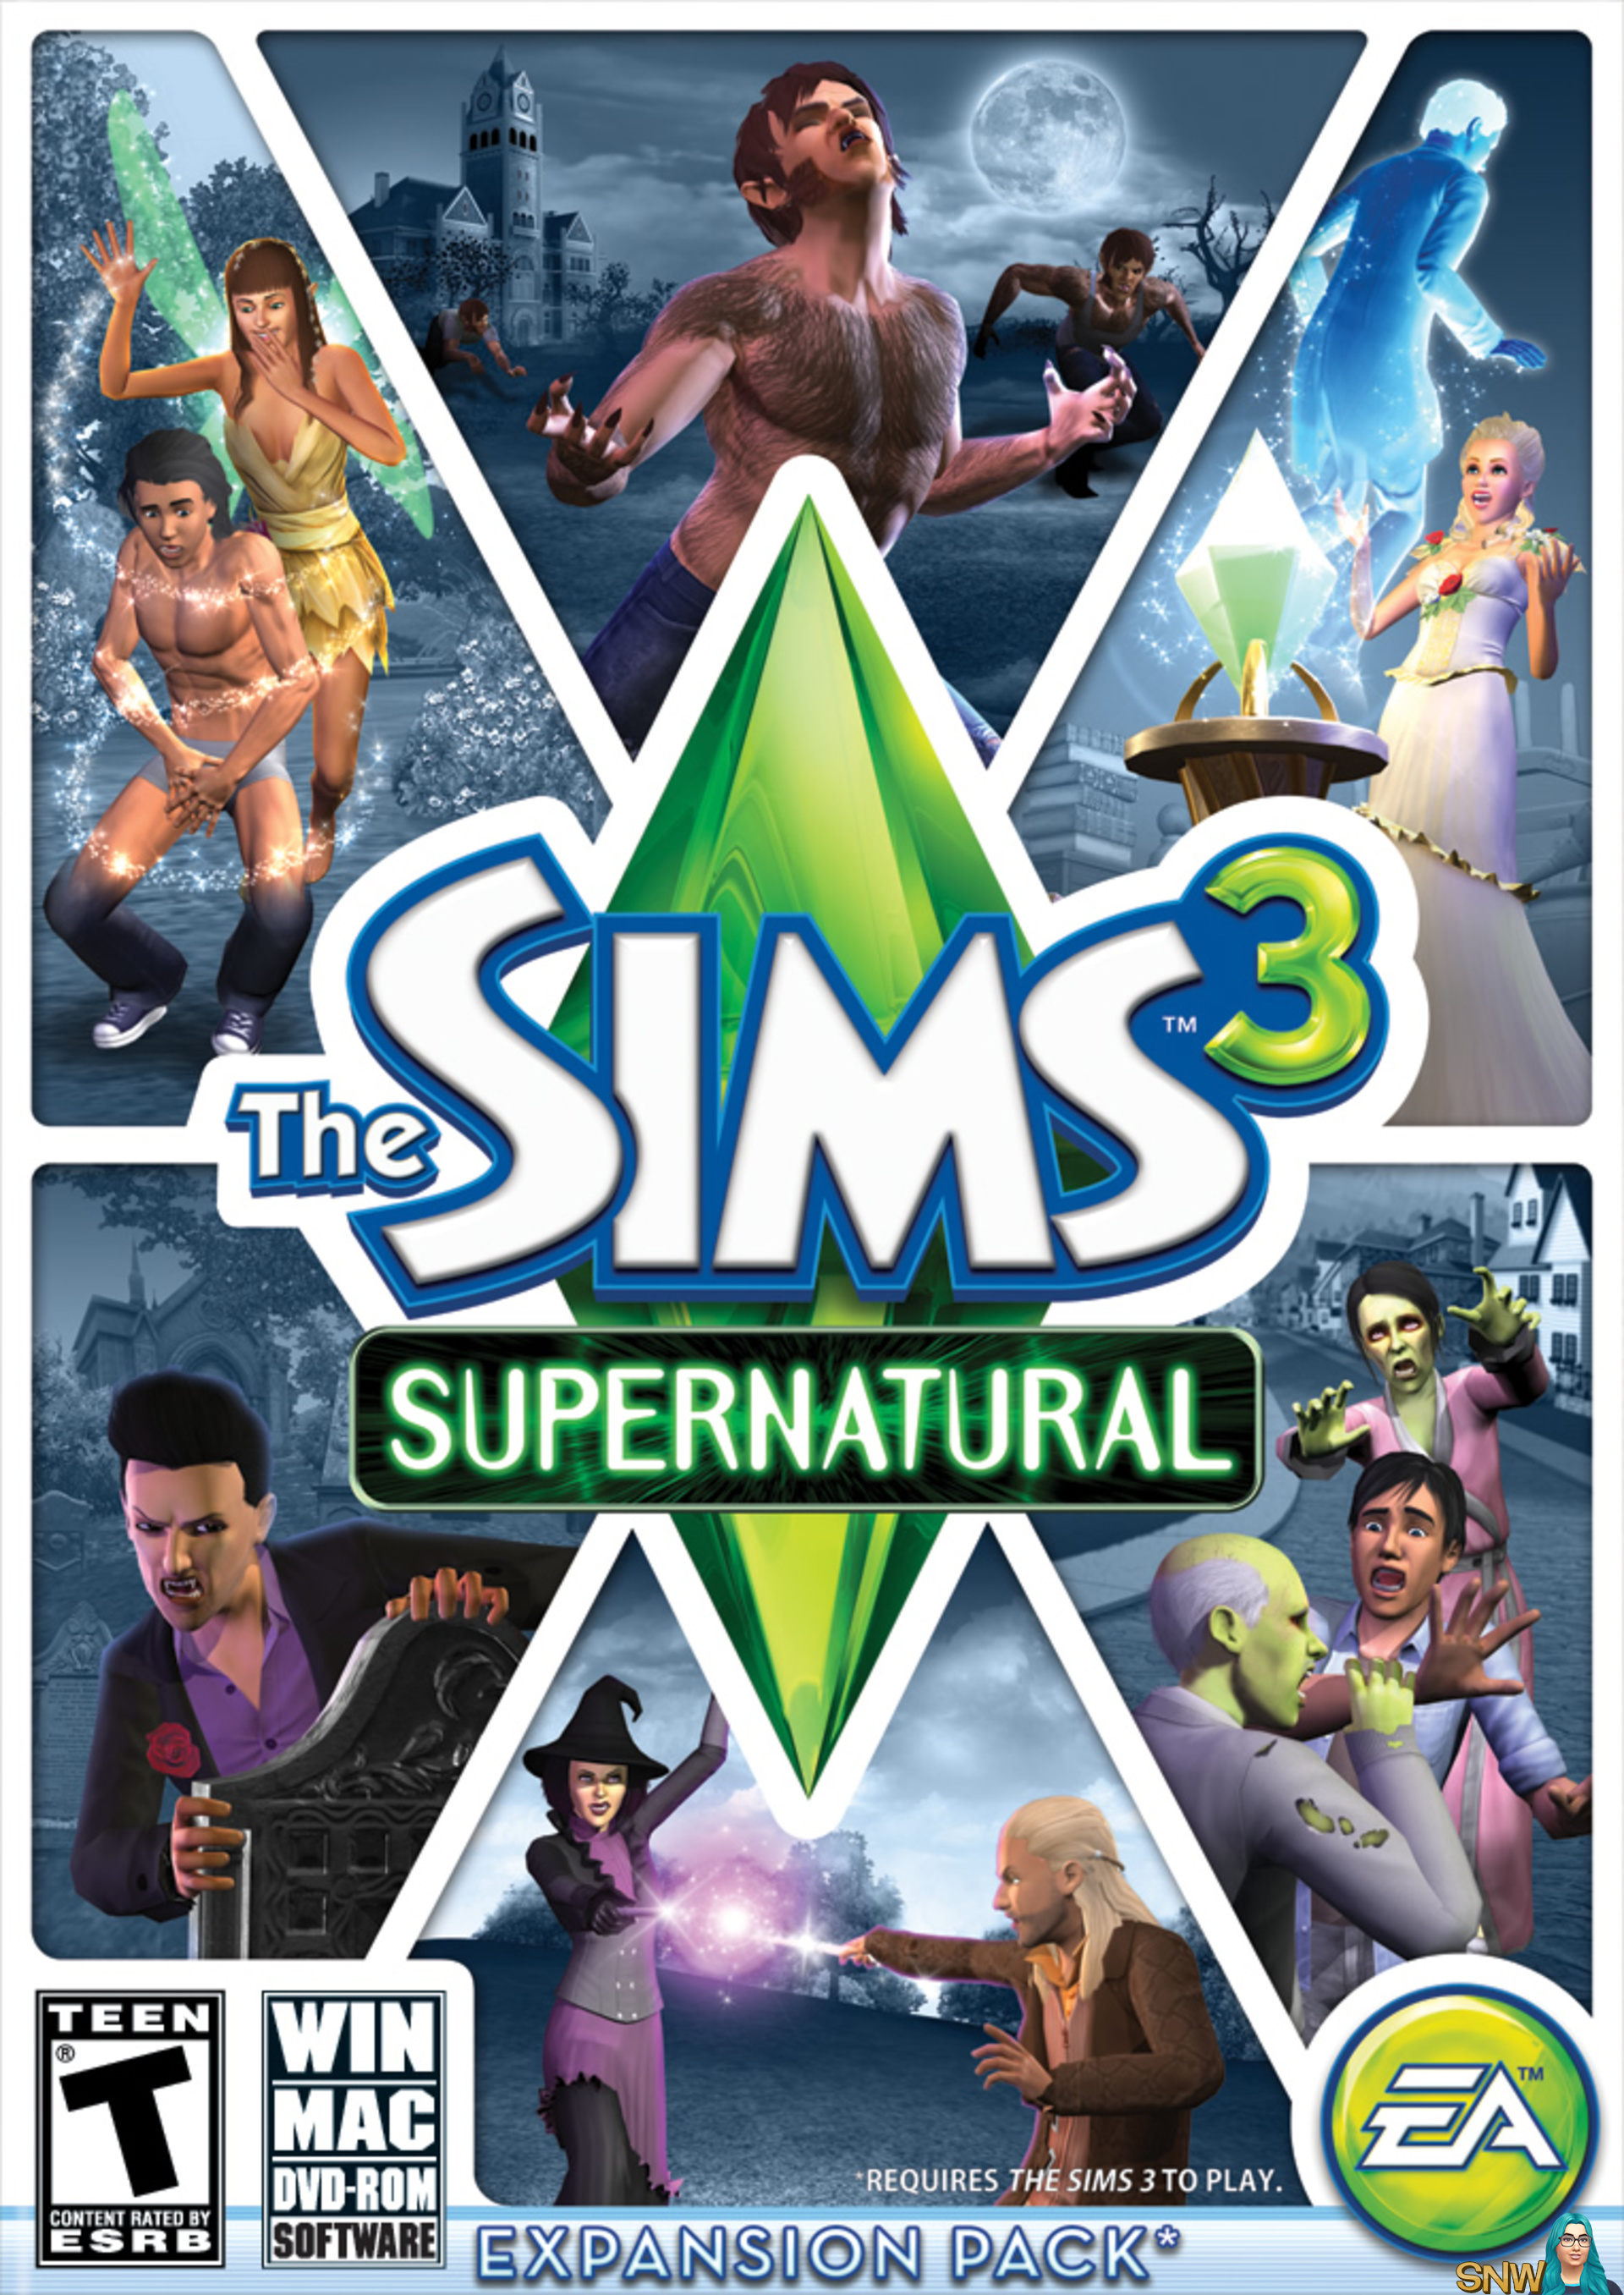 the sims 3 1.0 47 for android 4shared